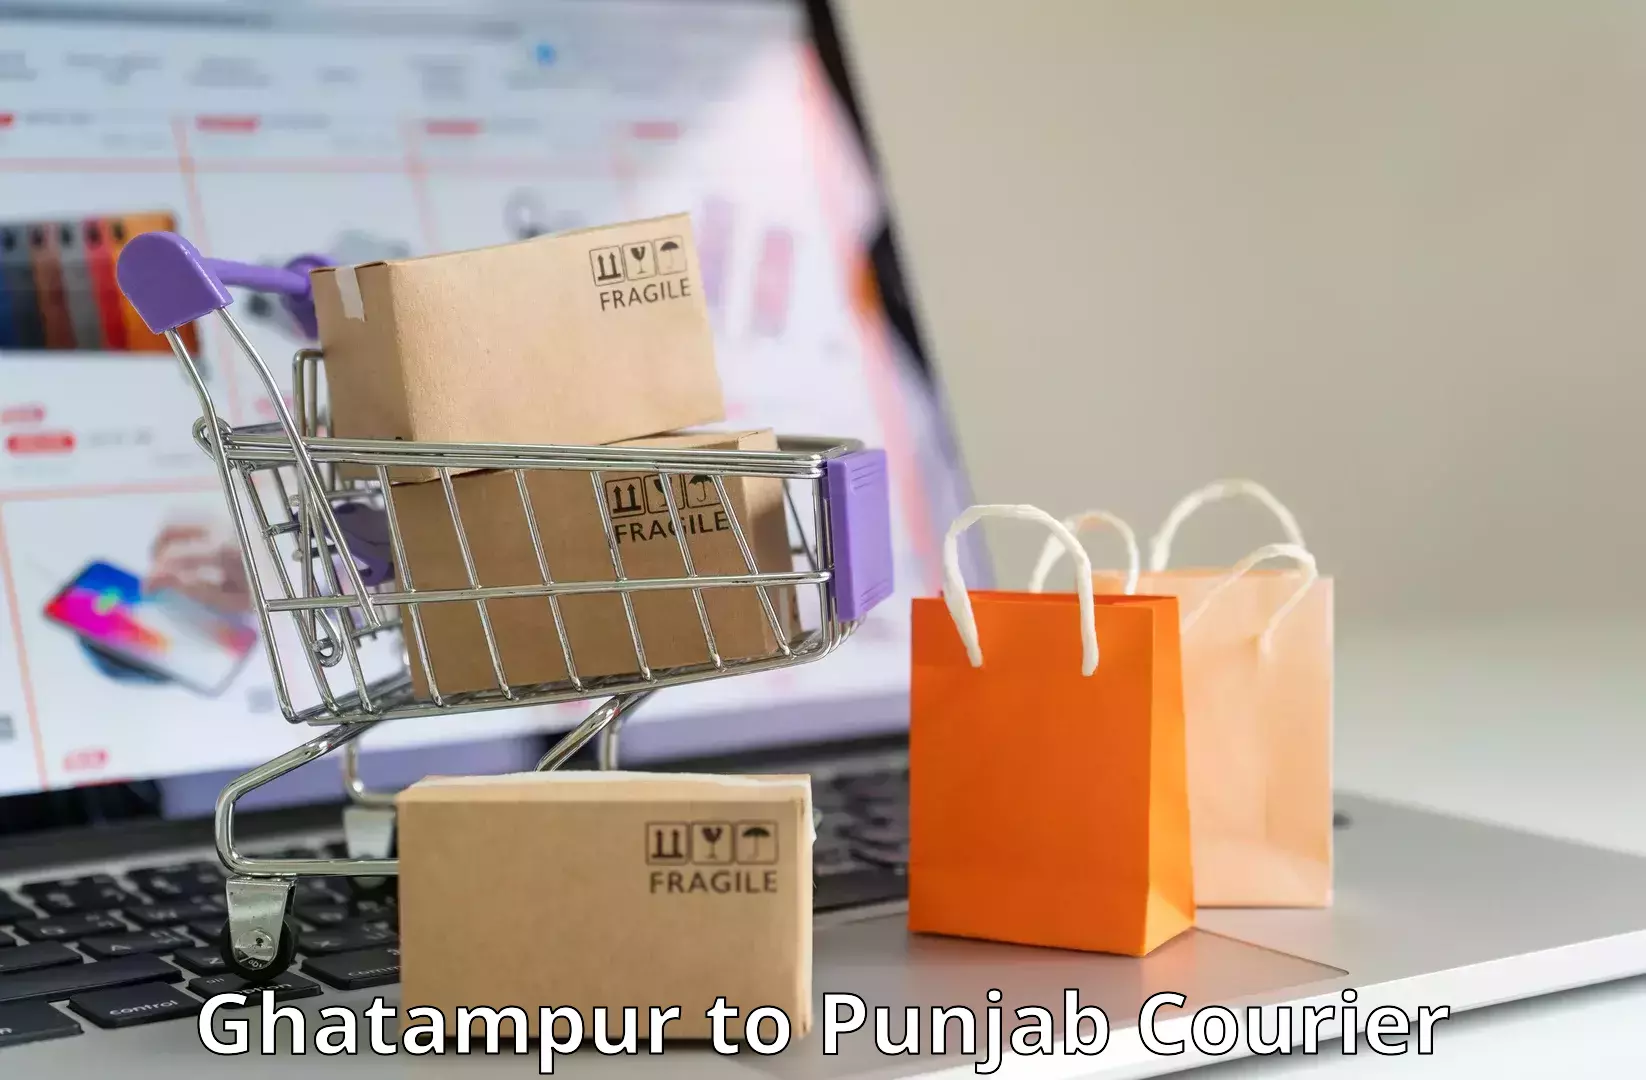 Efficient order fulfillment in Ghatampur to Ajnala